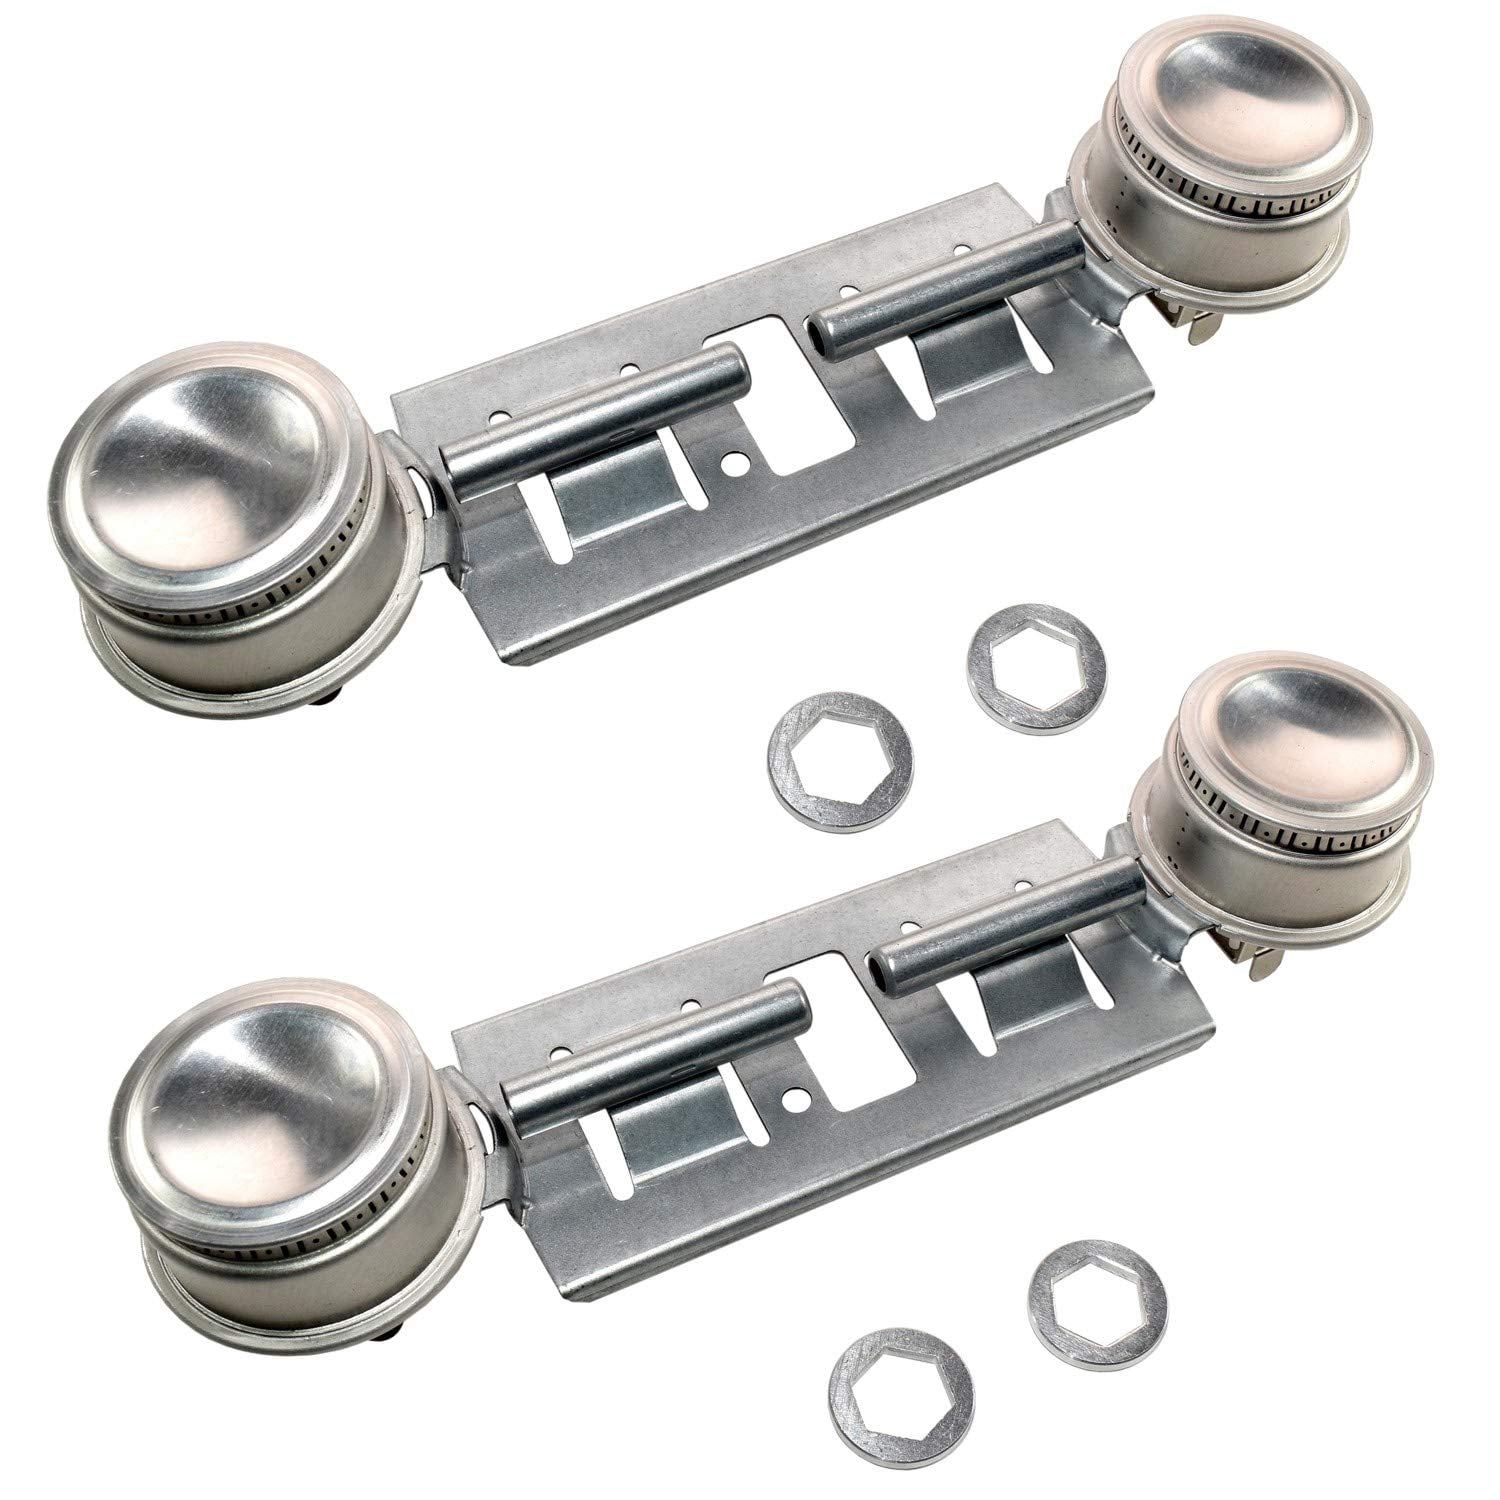 2-Pack GAS Range Double Burner Assembly Kit for GE General Electric JGBS Series